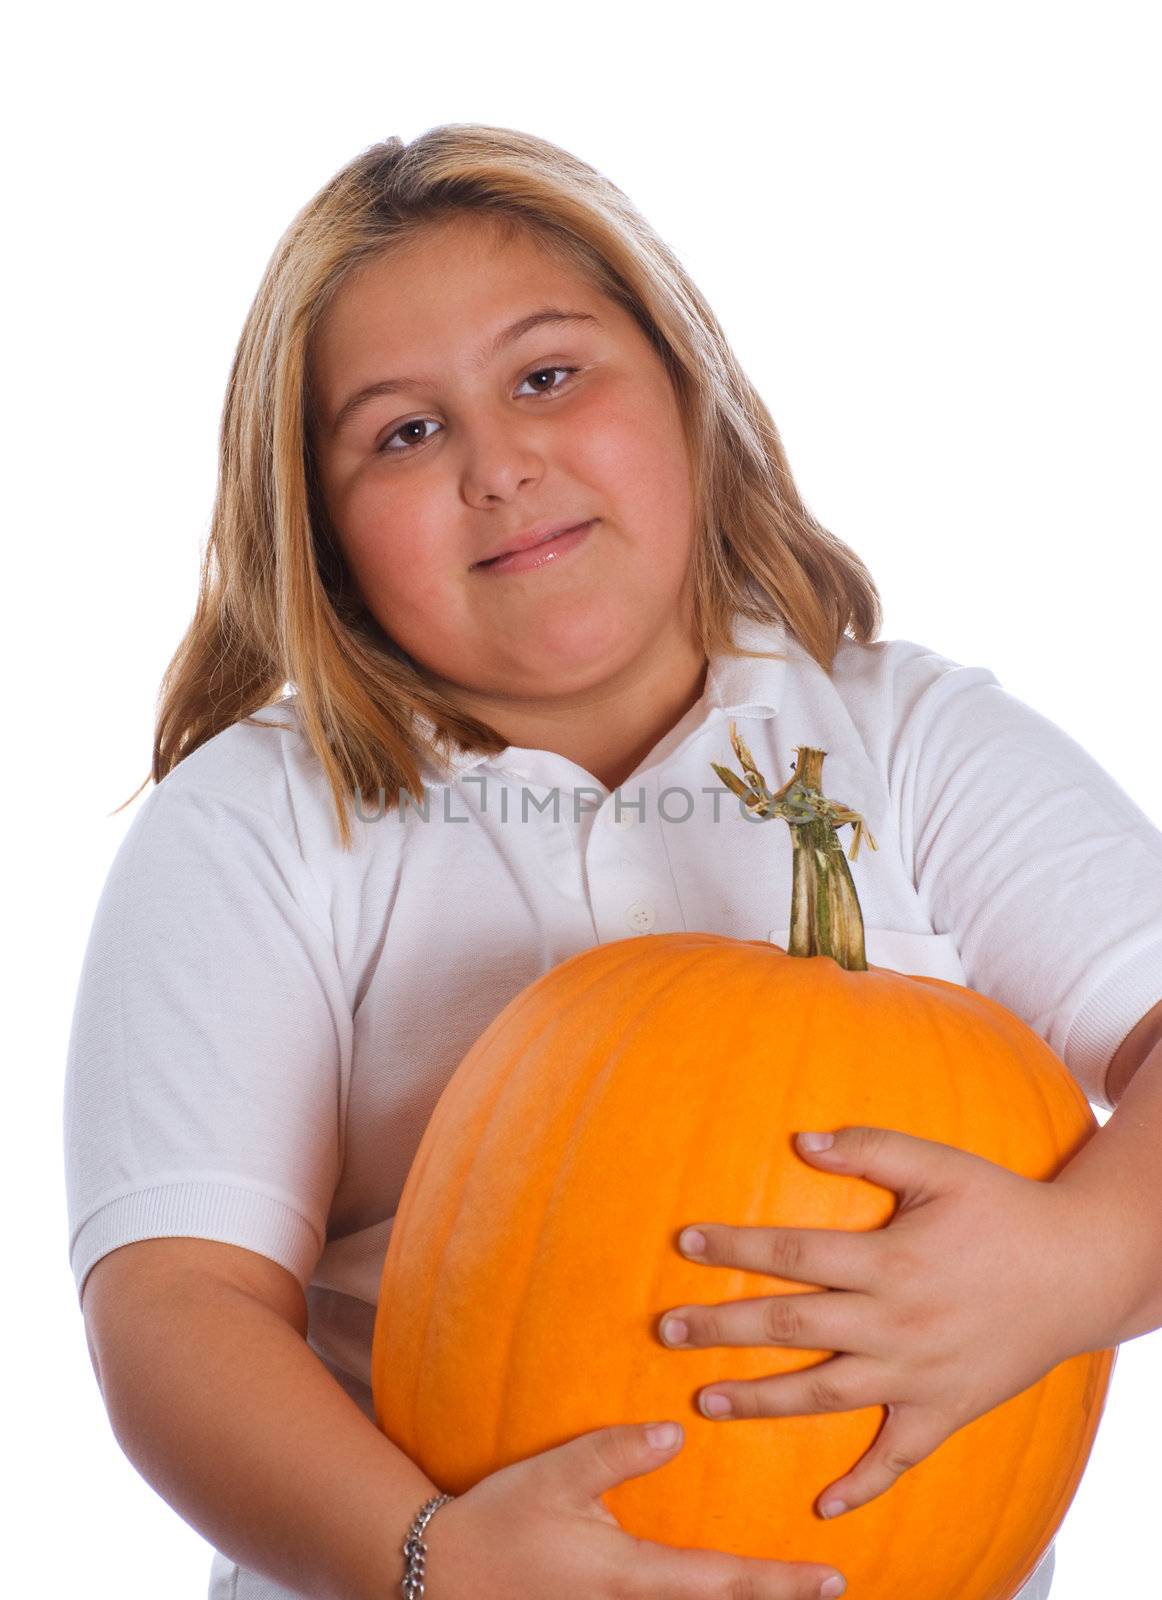 A young girl holding a heavy and large pumpkin, isolated against a white background